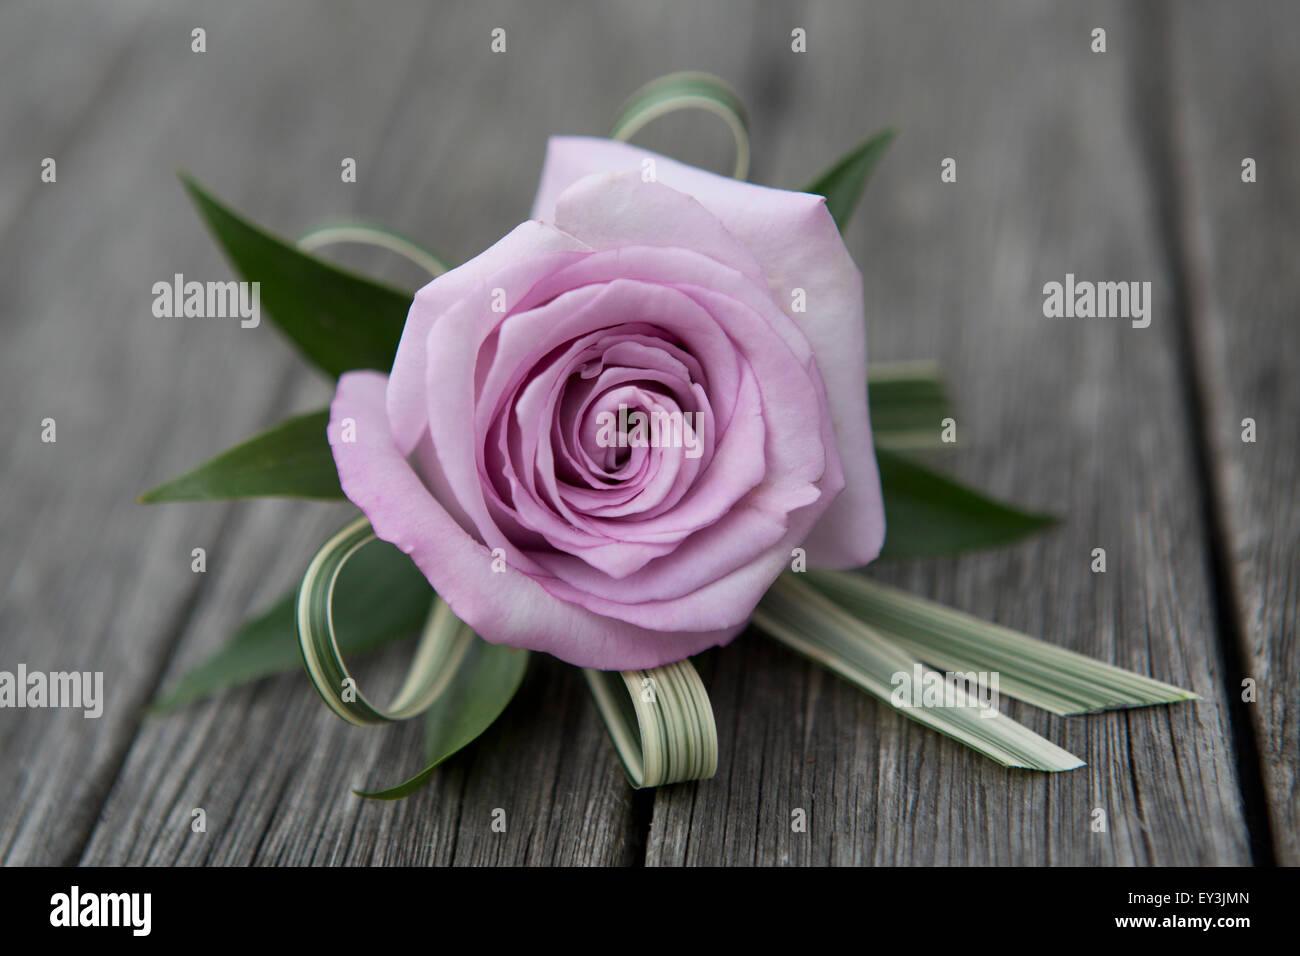 A boutonniere, button hole flower, pink rose. Stock Photo